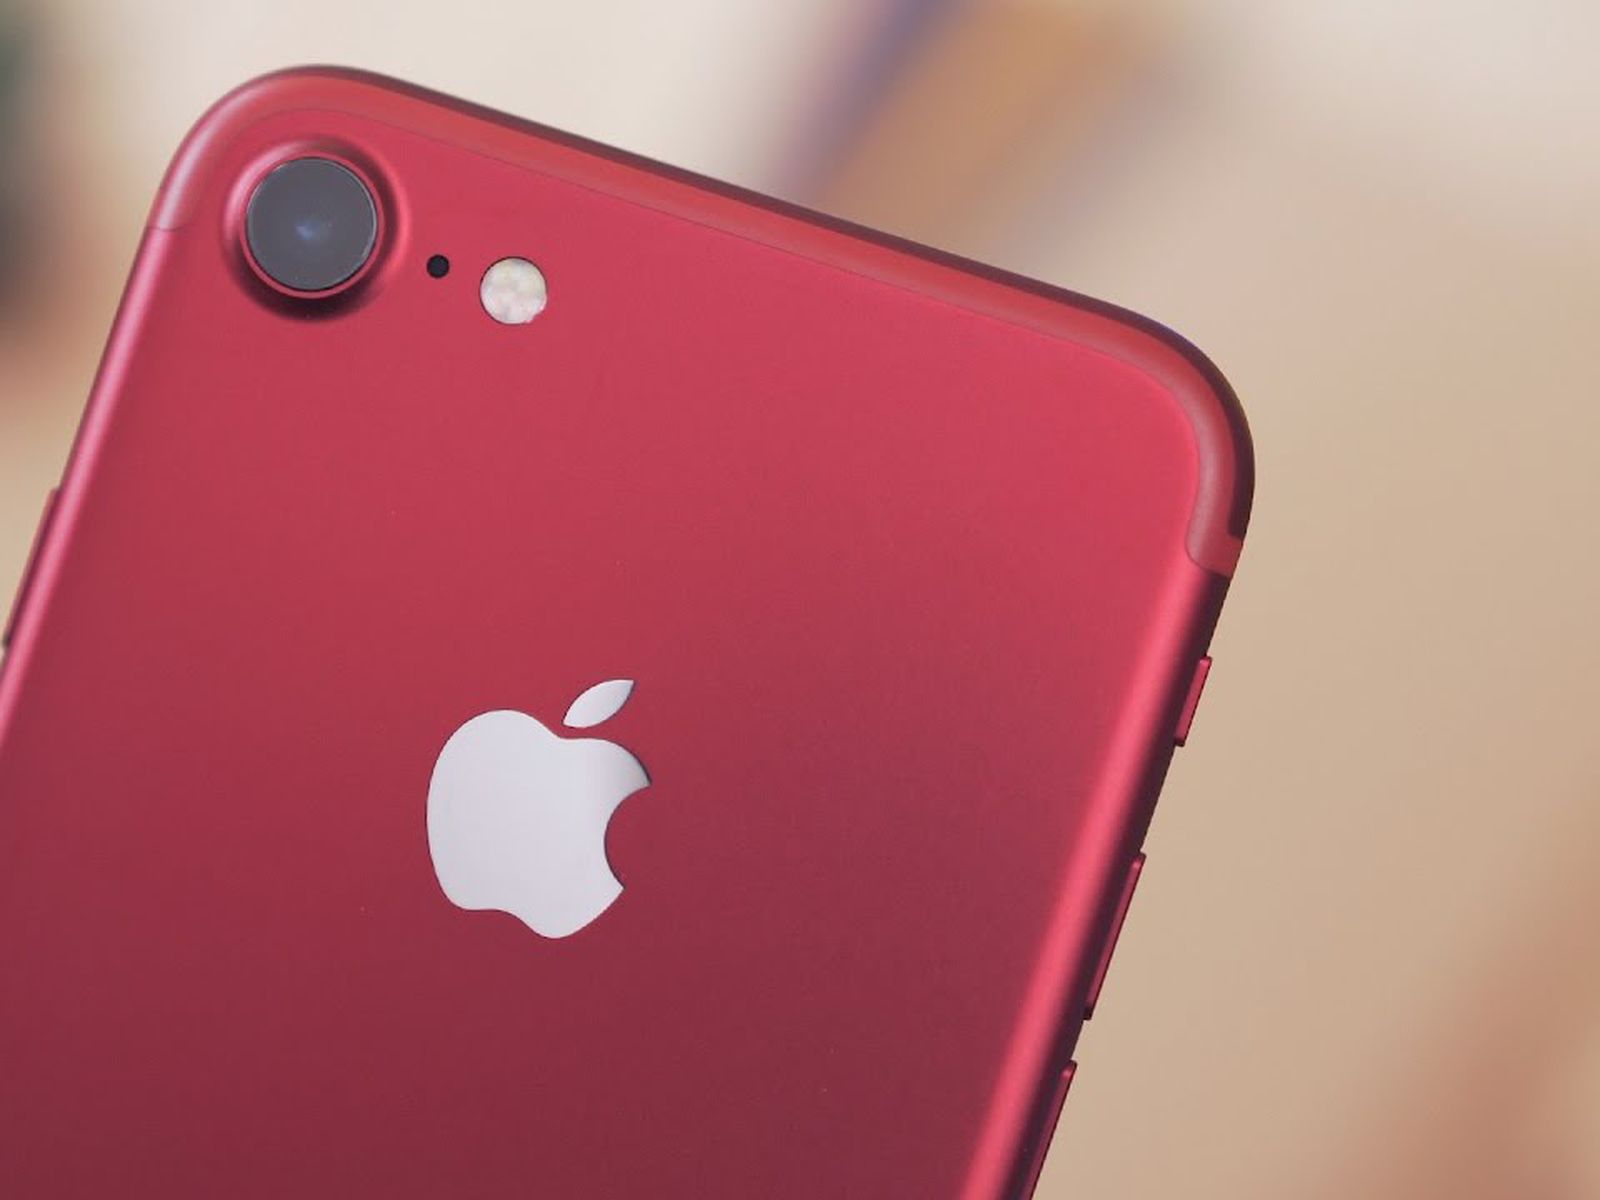 Ten Things To Love, Or Not, About The New Apple iPhone 7 Plus (PRODUCT)RED:  Hands-On